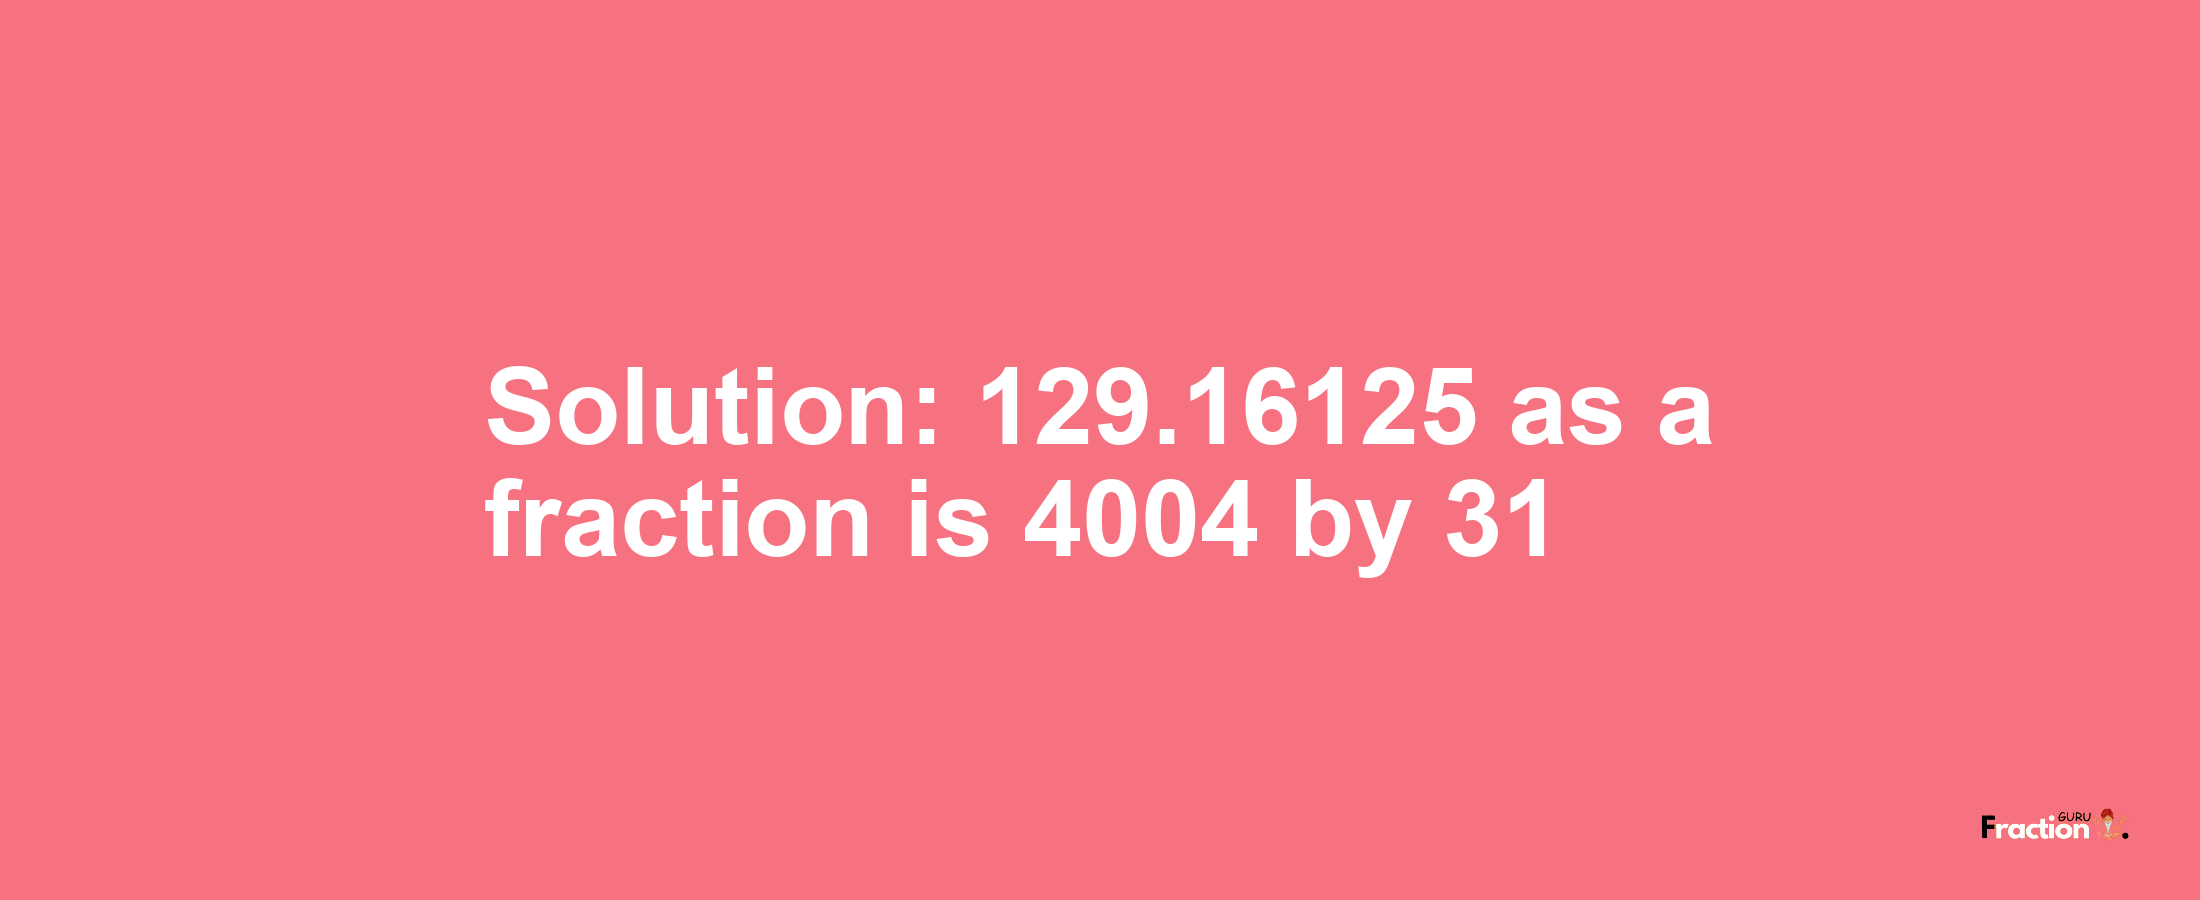 Solution:129.16125 as a fraction is 4004/31